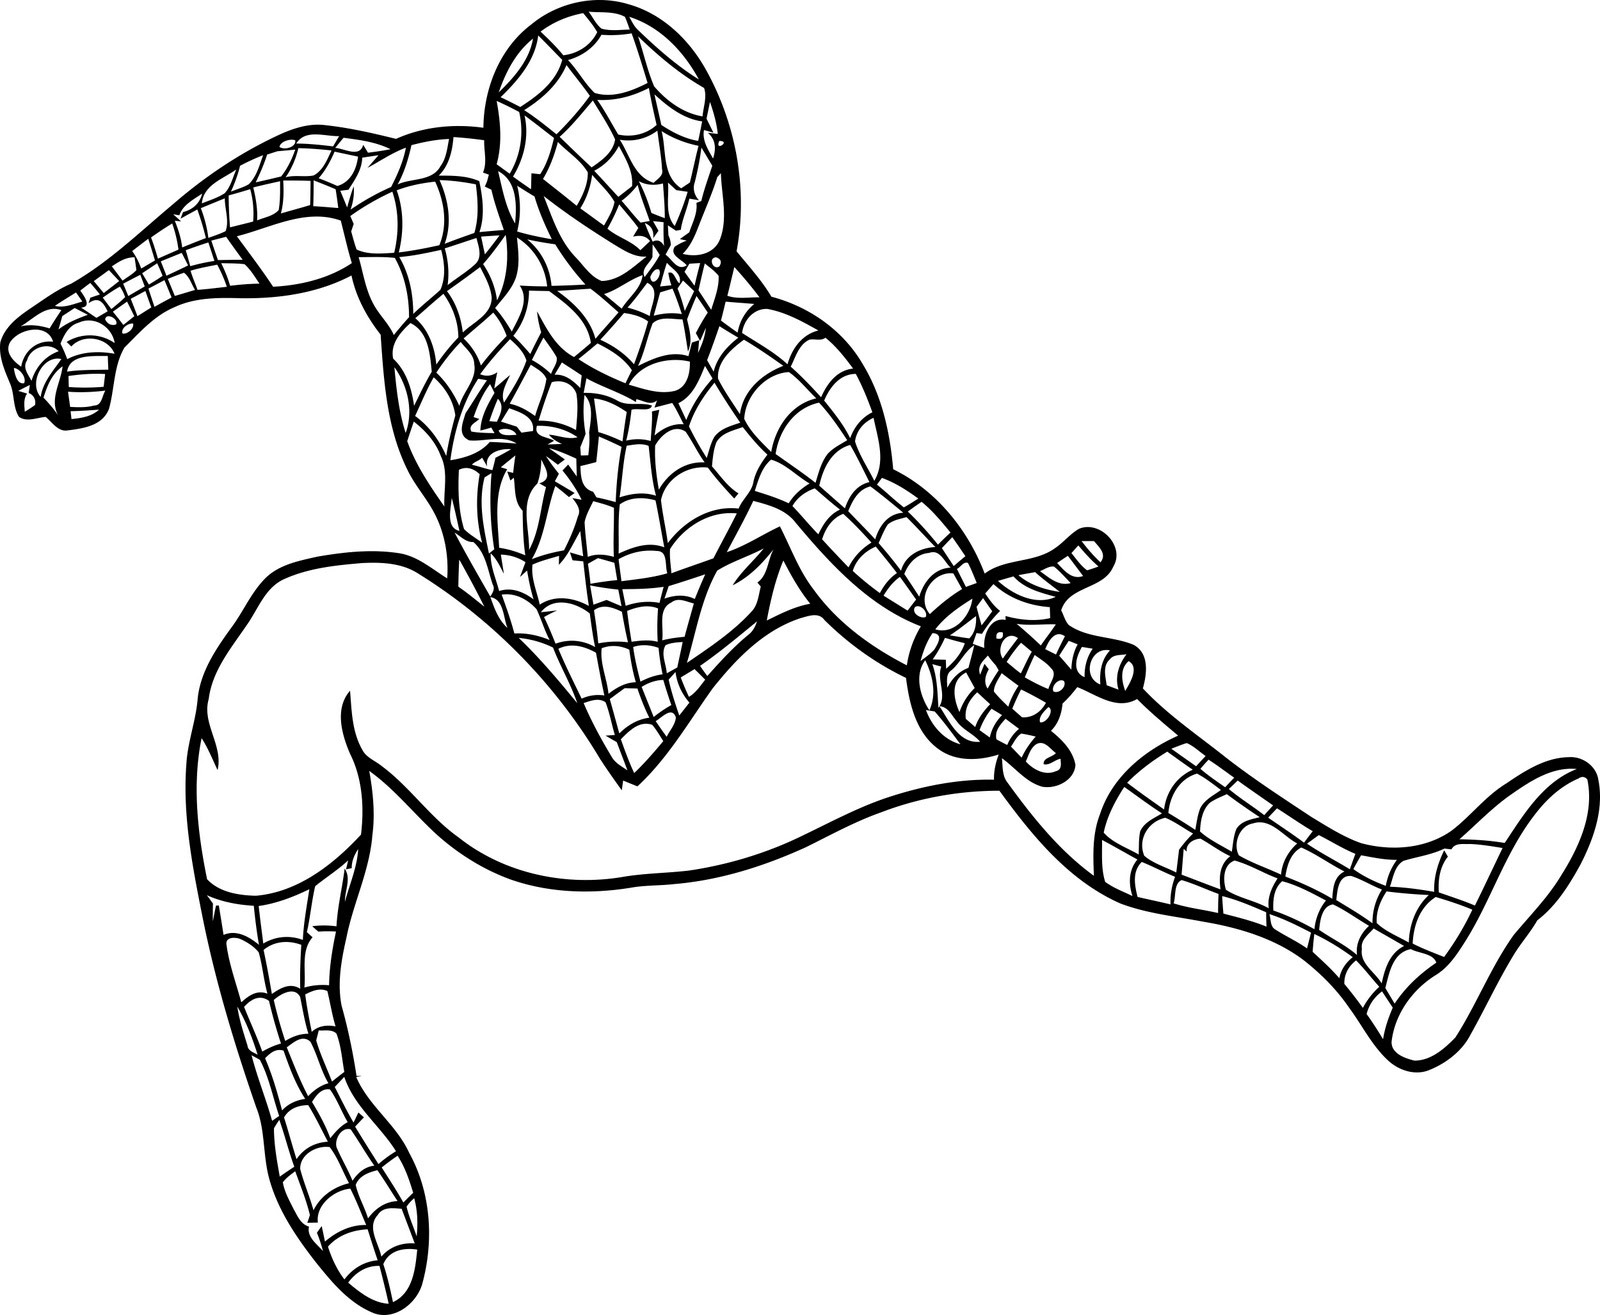 Spiderman Coloring Pages For Toddlers
 1000 images about Coloring Pages on Pinterest